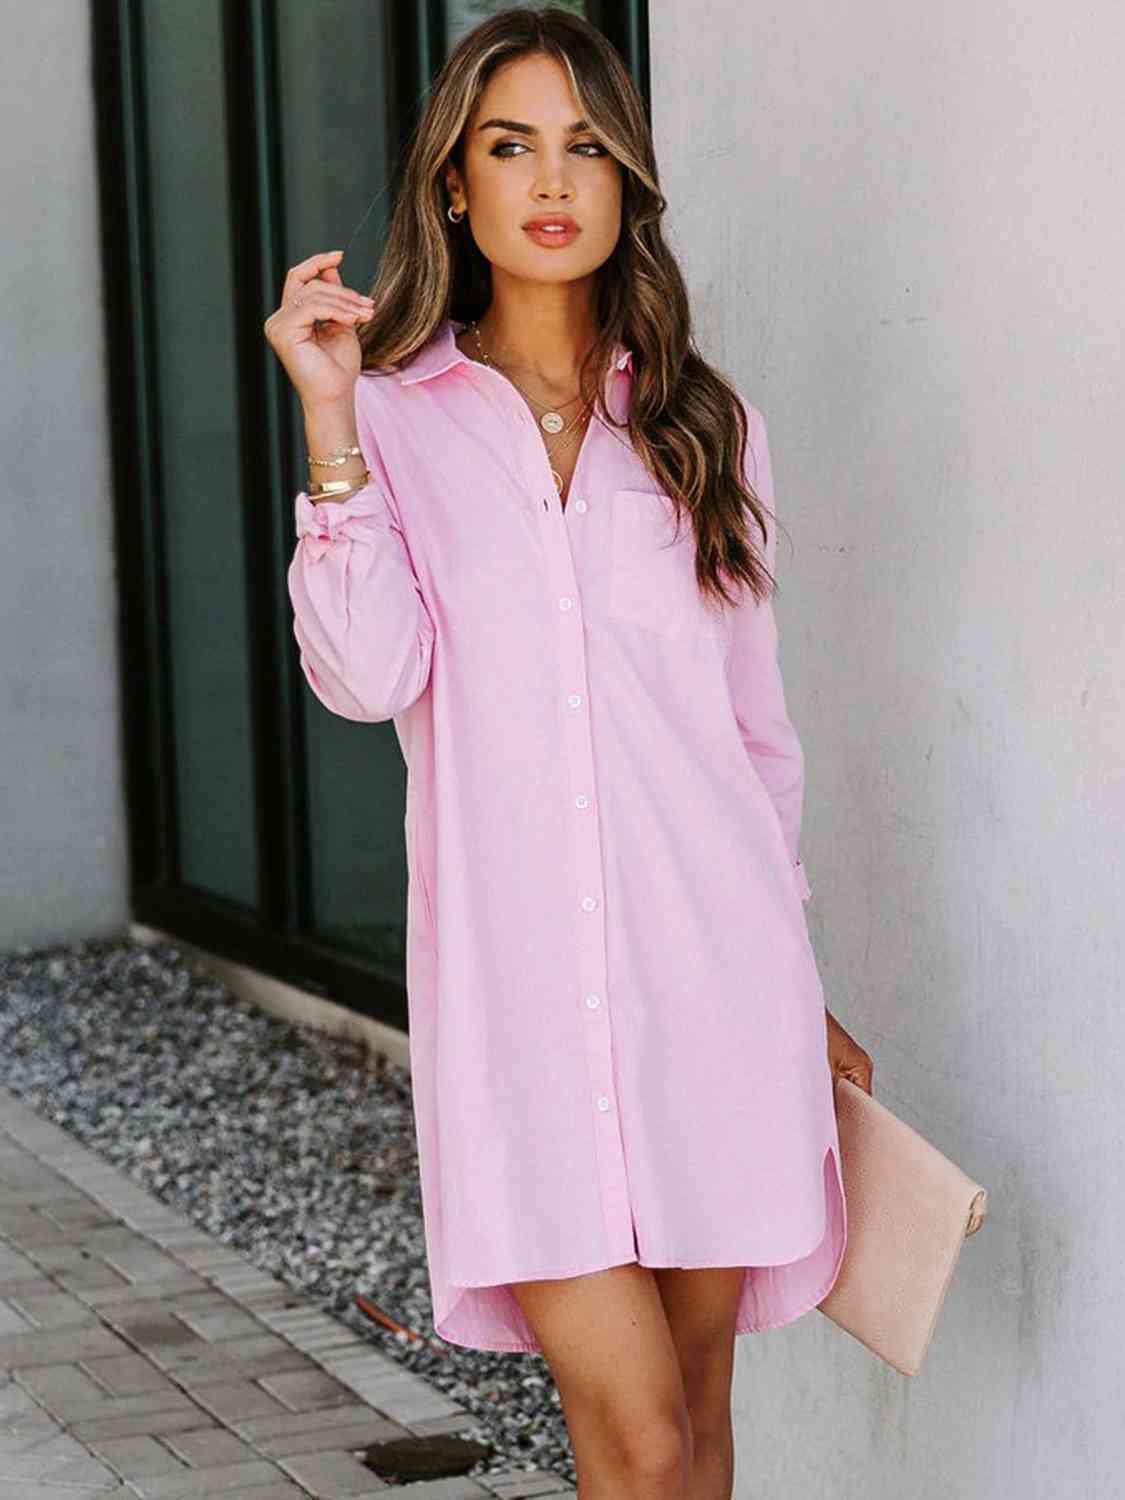 Button Up Collared Neck Long Sleeve Shirt Dress BLUE ZONE PLANET